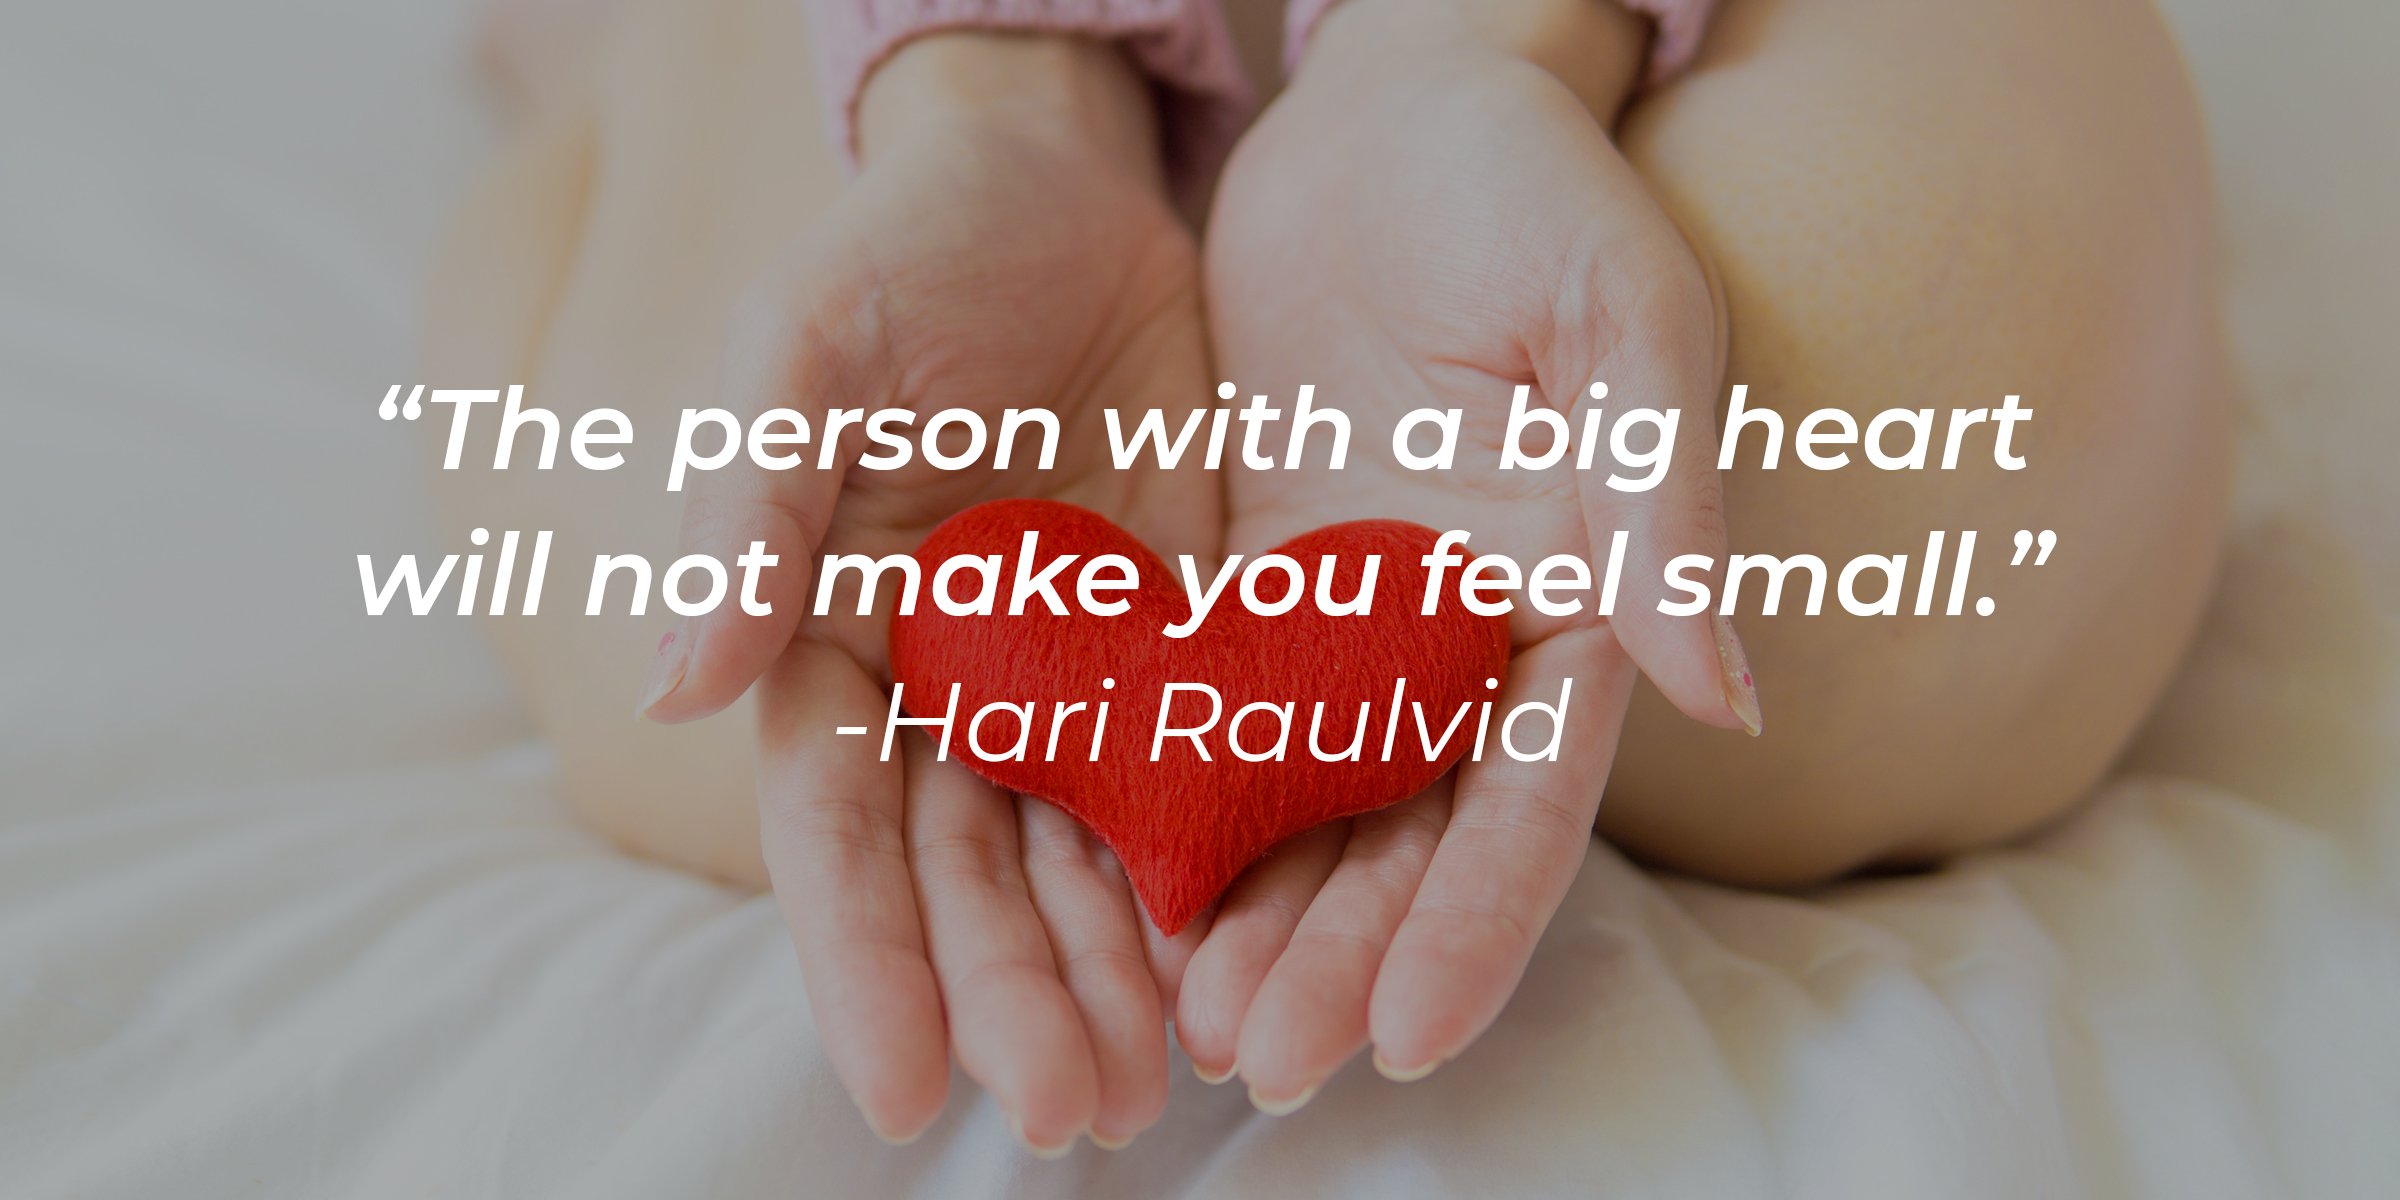 Source: Pexels | Hand holding a heart shape with the quote: "The person with a big heart will not make you feel small."